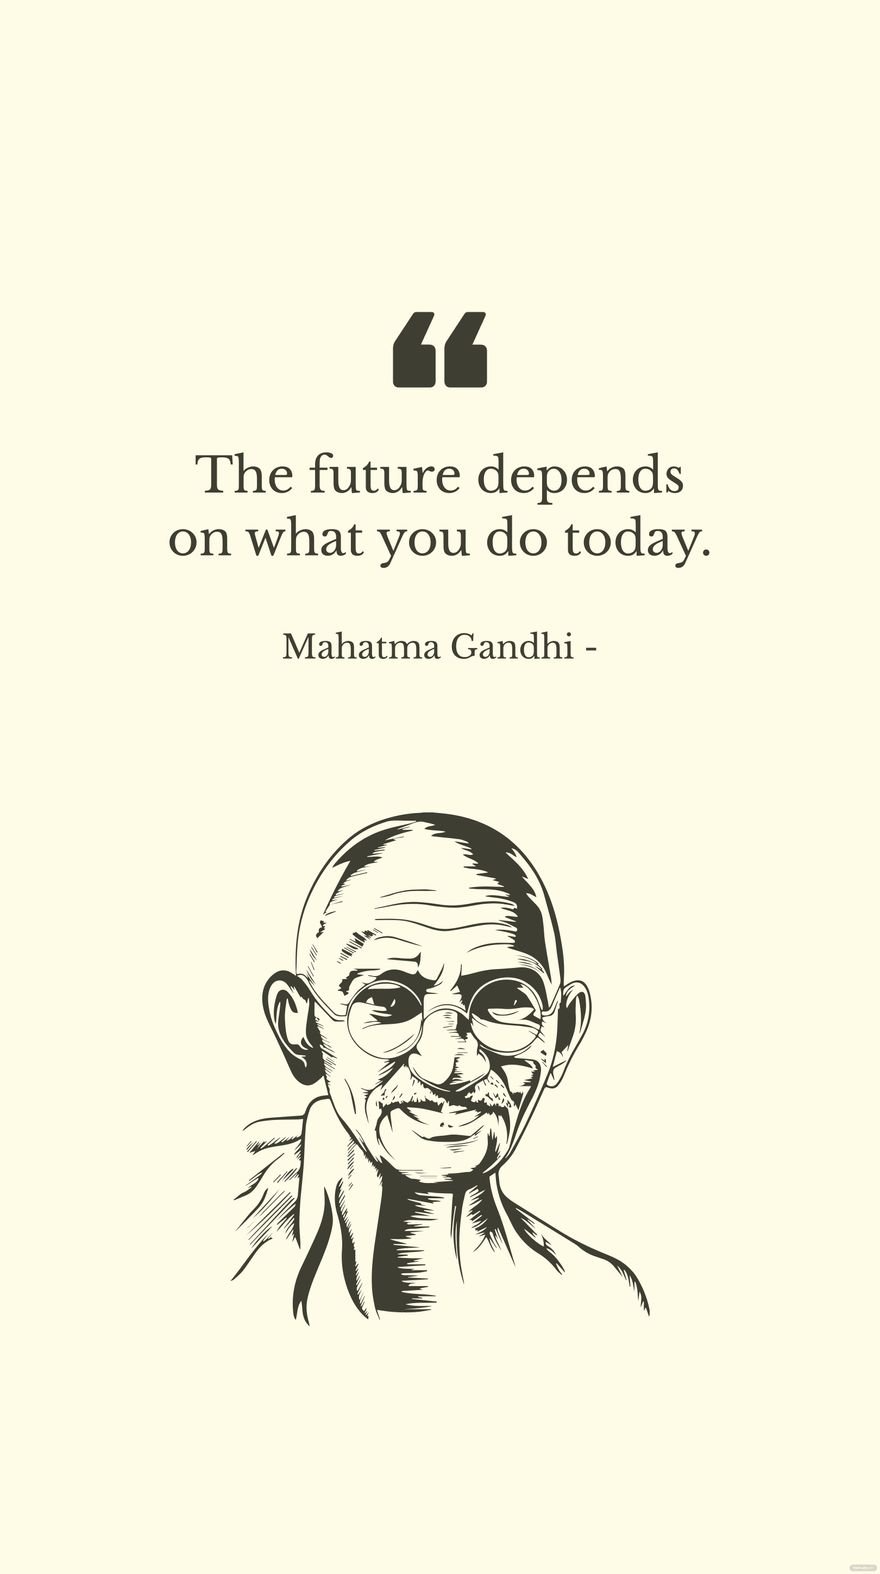 Free Mahatma Gandhi - The future depends on what you do today. in JPG